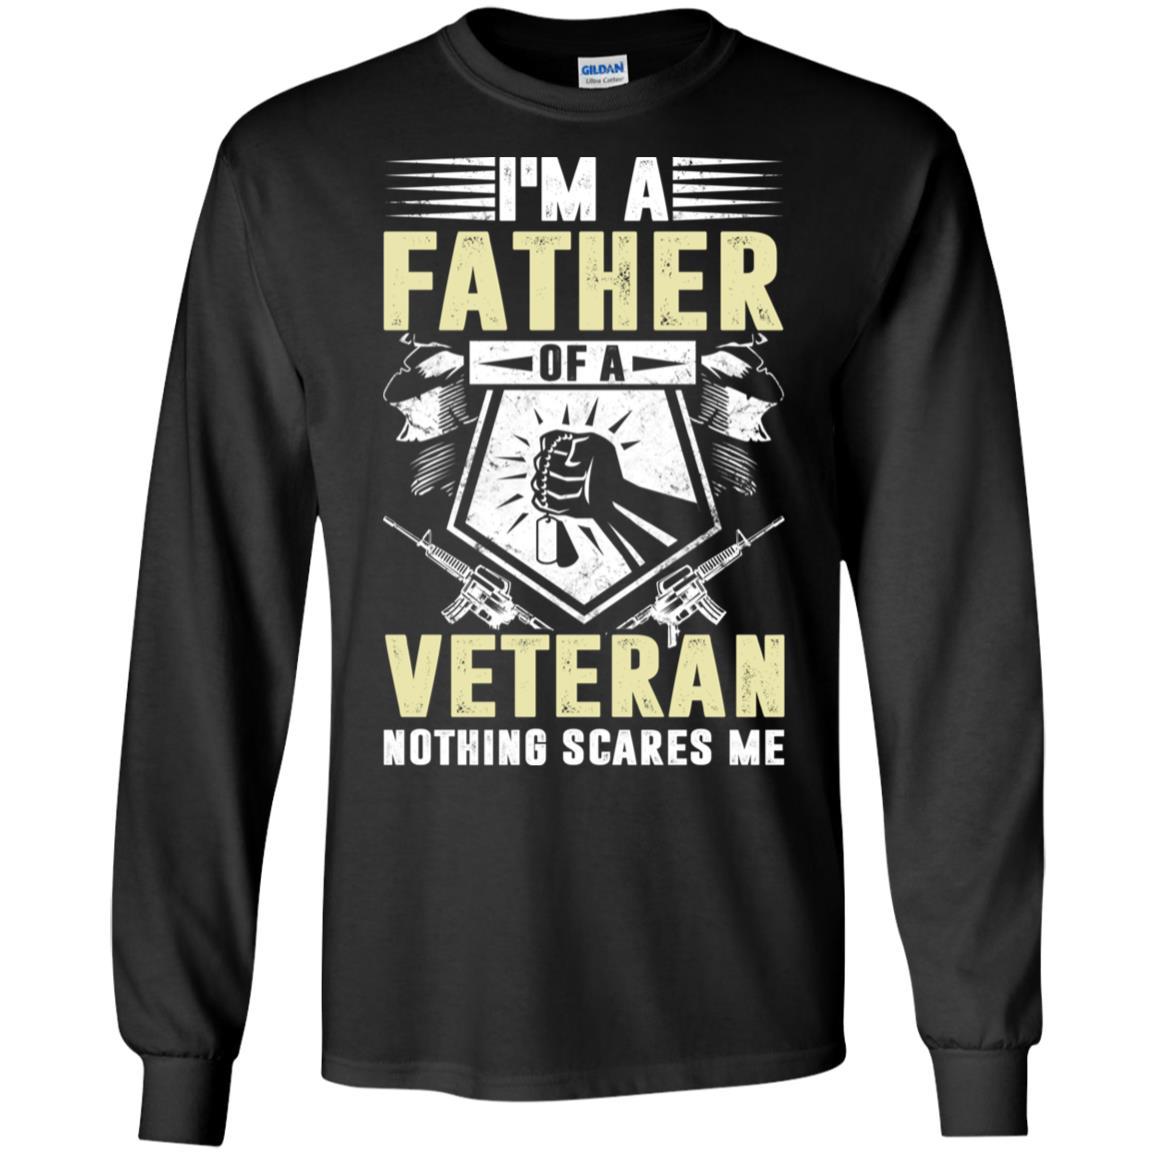 Military T-Shirt "I'M A FATHER OF A VETERAN NOTHING SCARES ME On" Front-TShirt-General-Veterans Nation